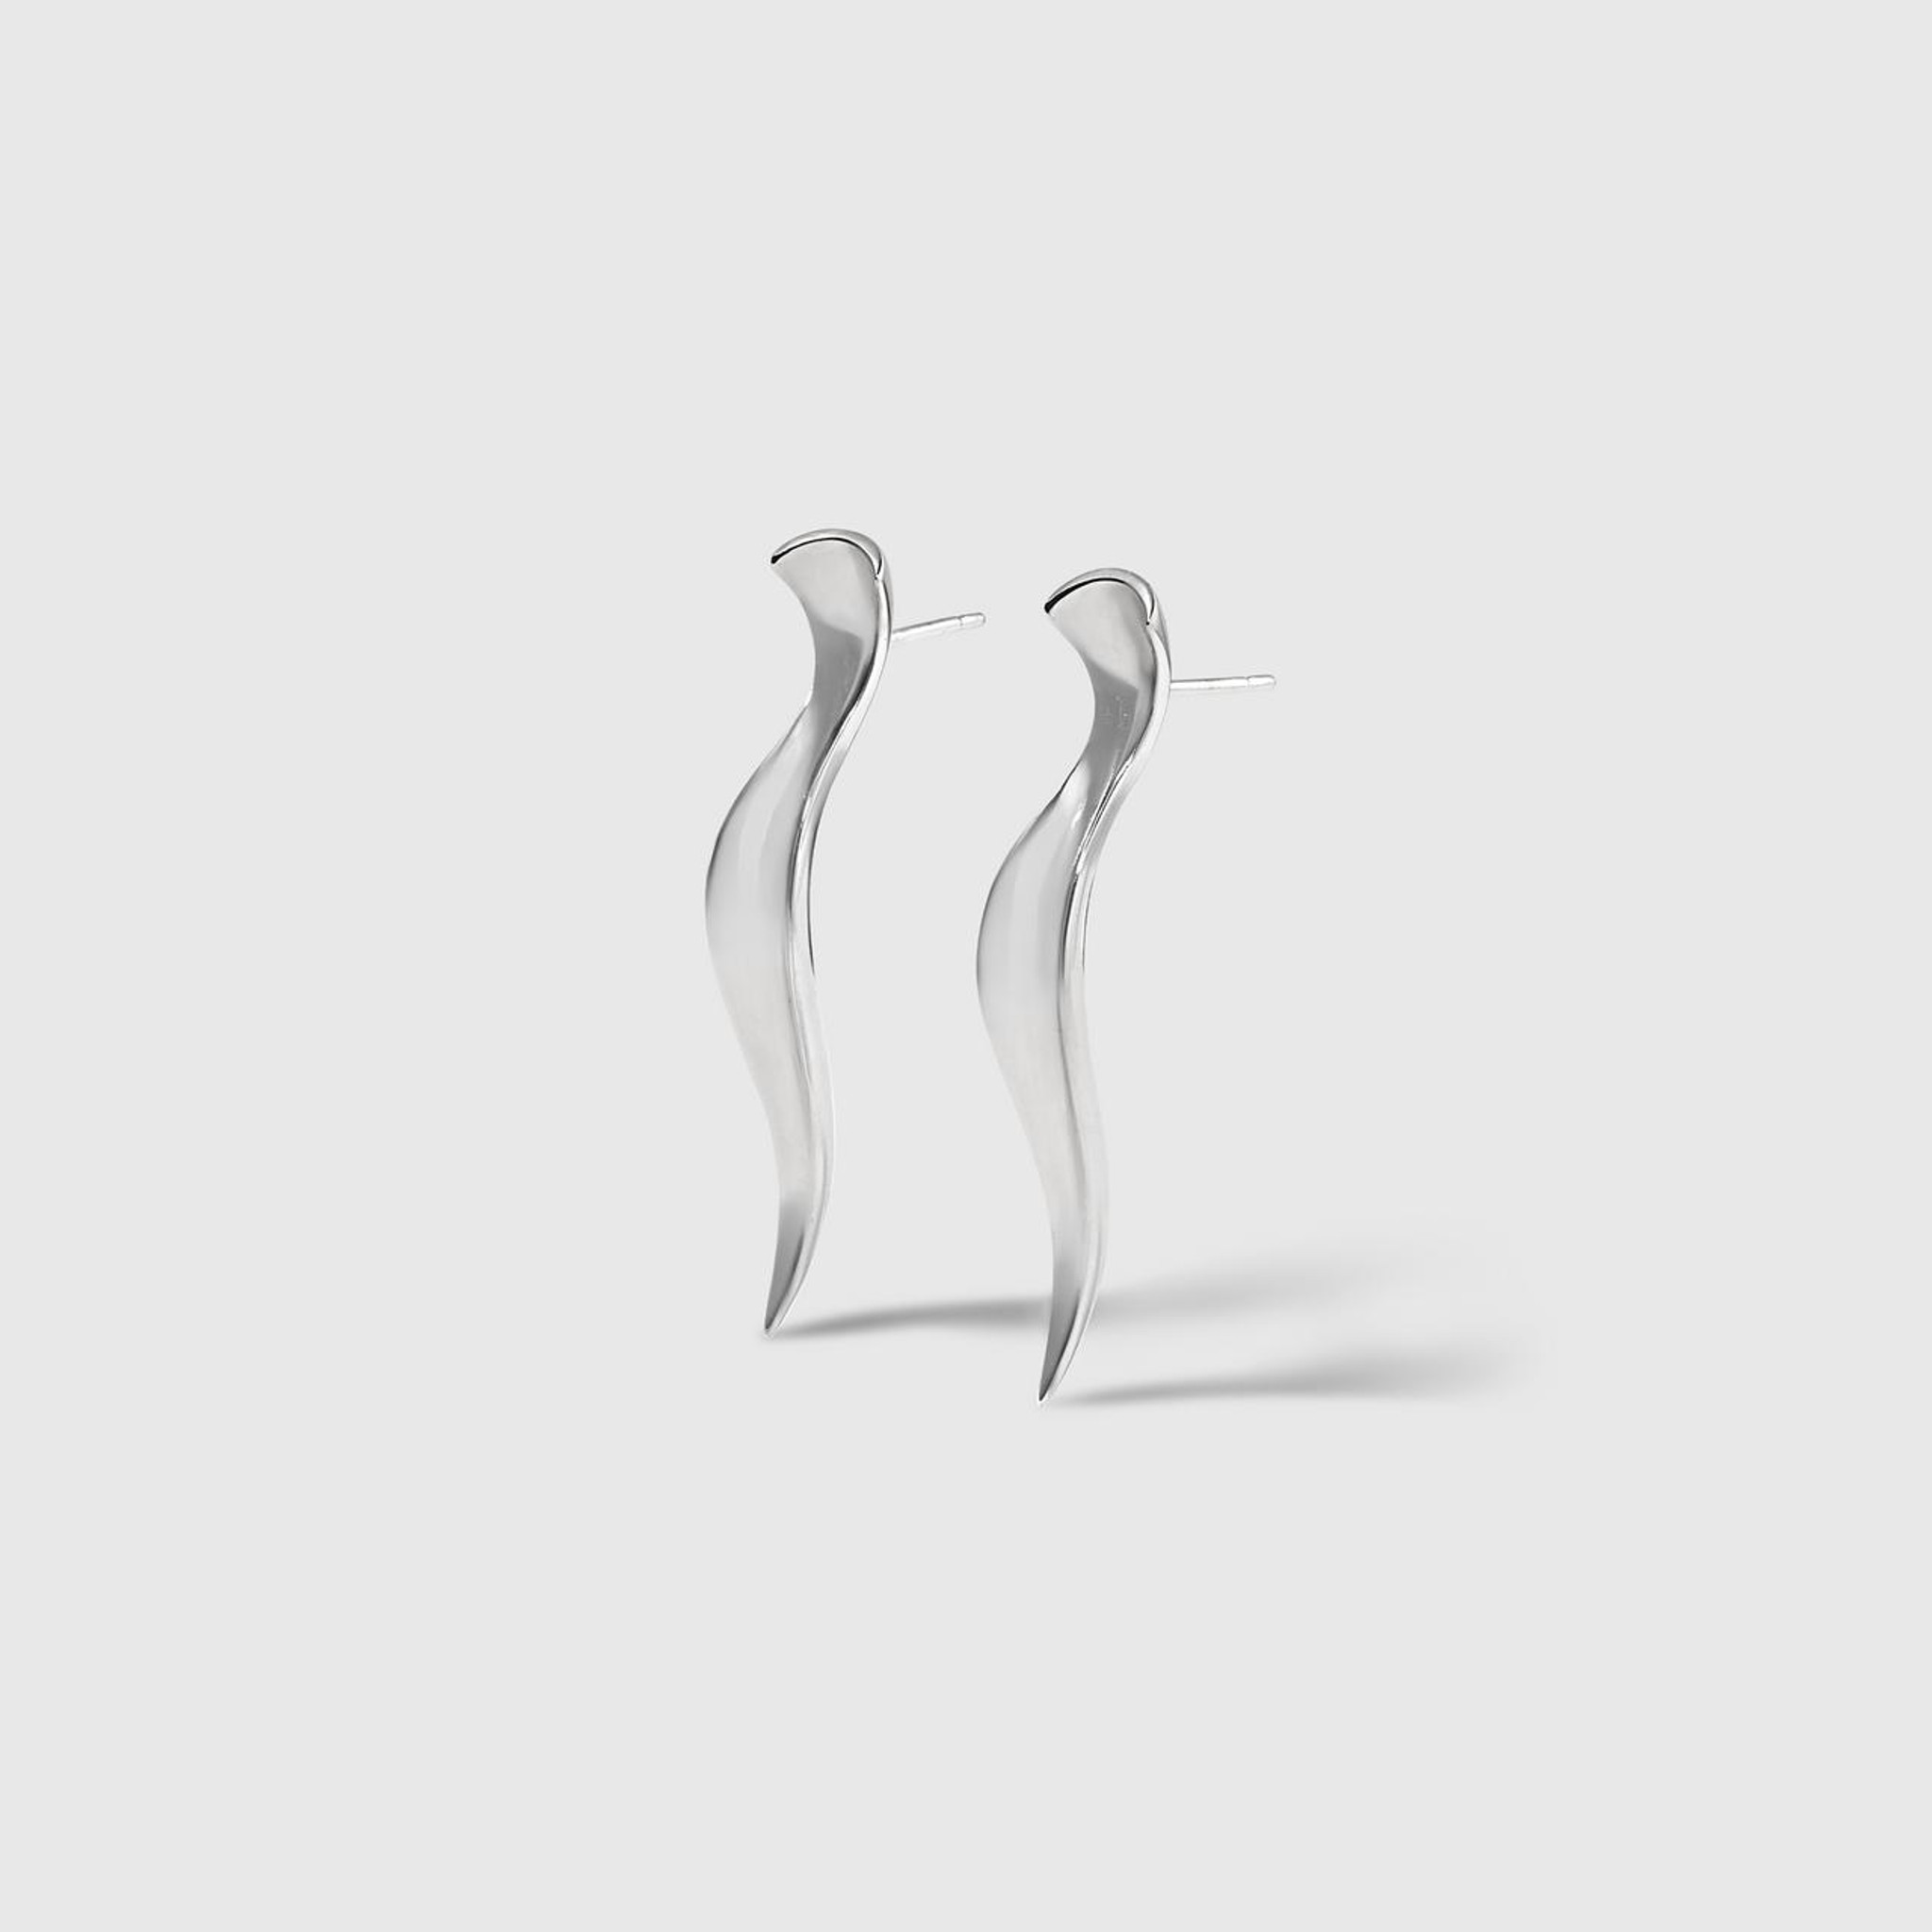 Couture "Persephone" Earrings, 18K White Gold, Contemporary Sculptural Earrings by Ashley Childs. 18K White Gold, 1.75” in length. 18Kt white gold posts and backs. Perfect for day or night.